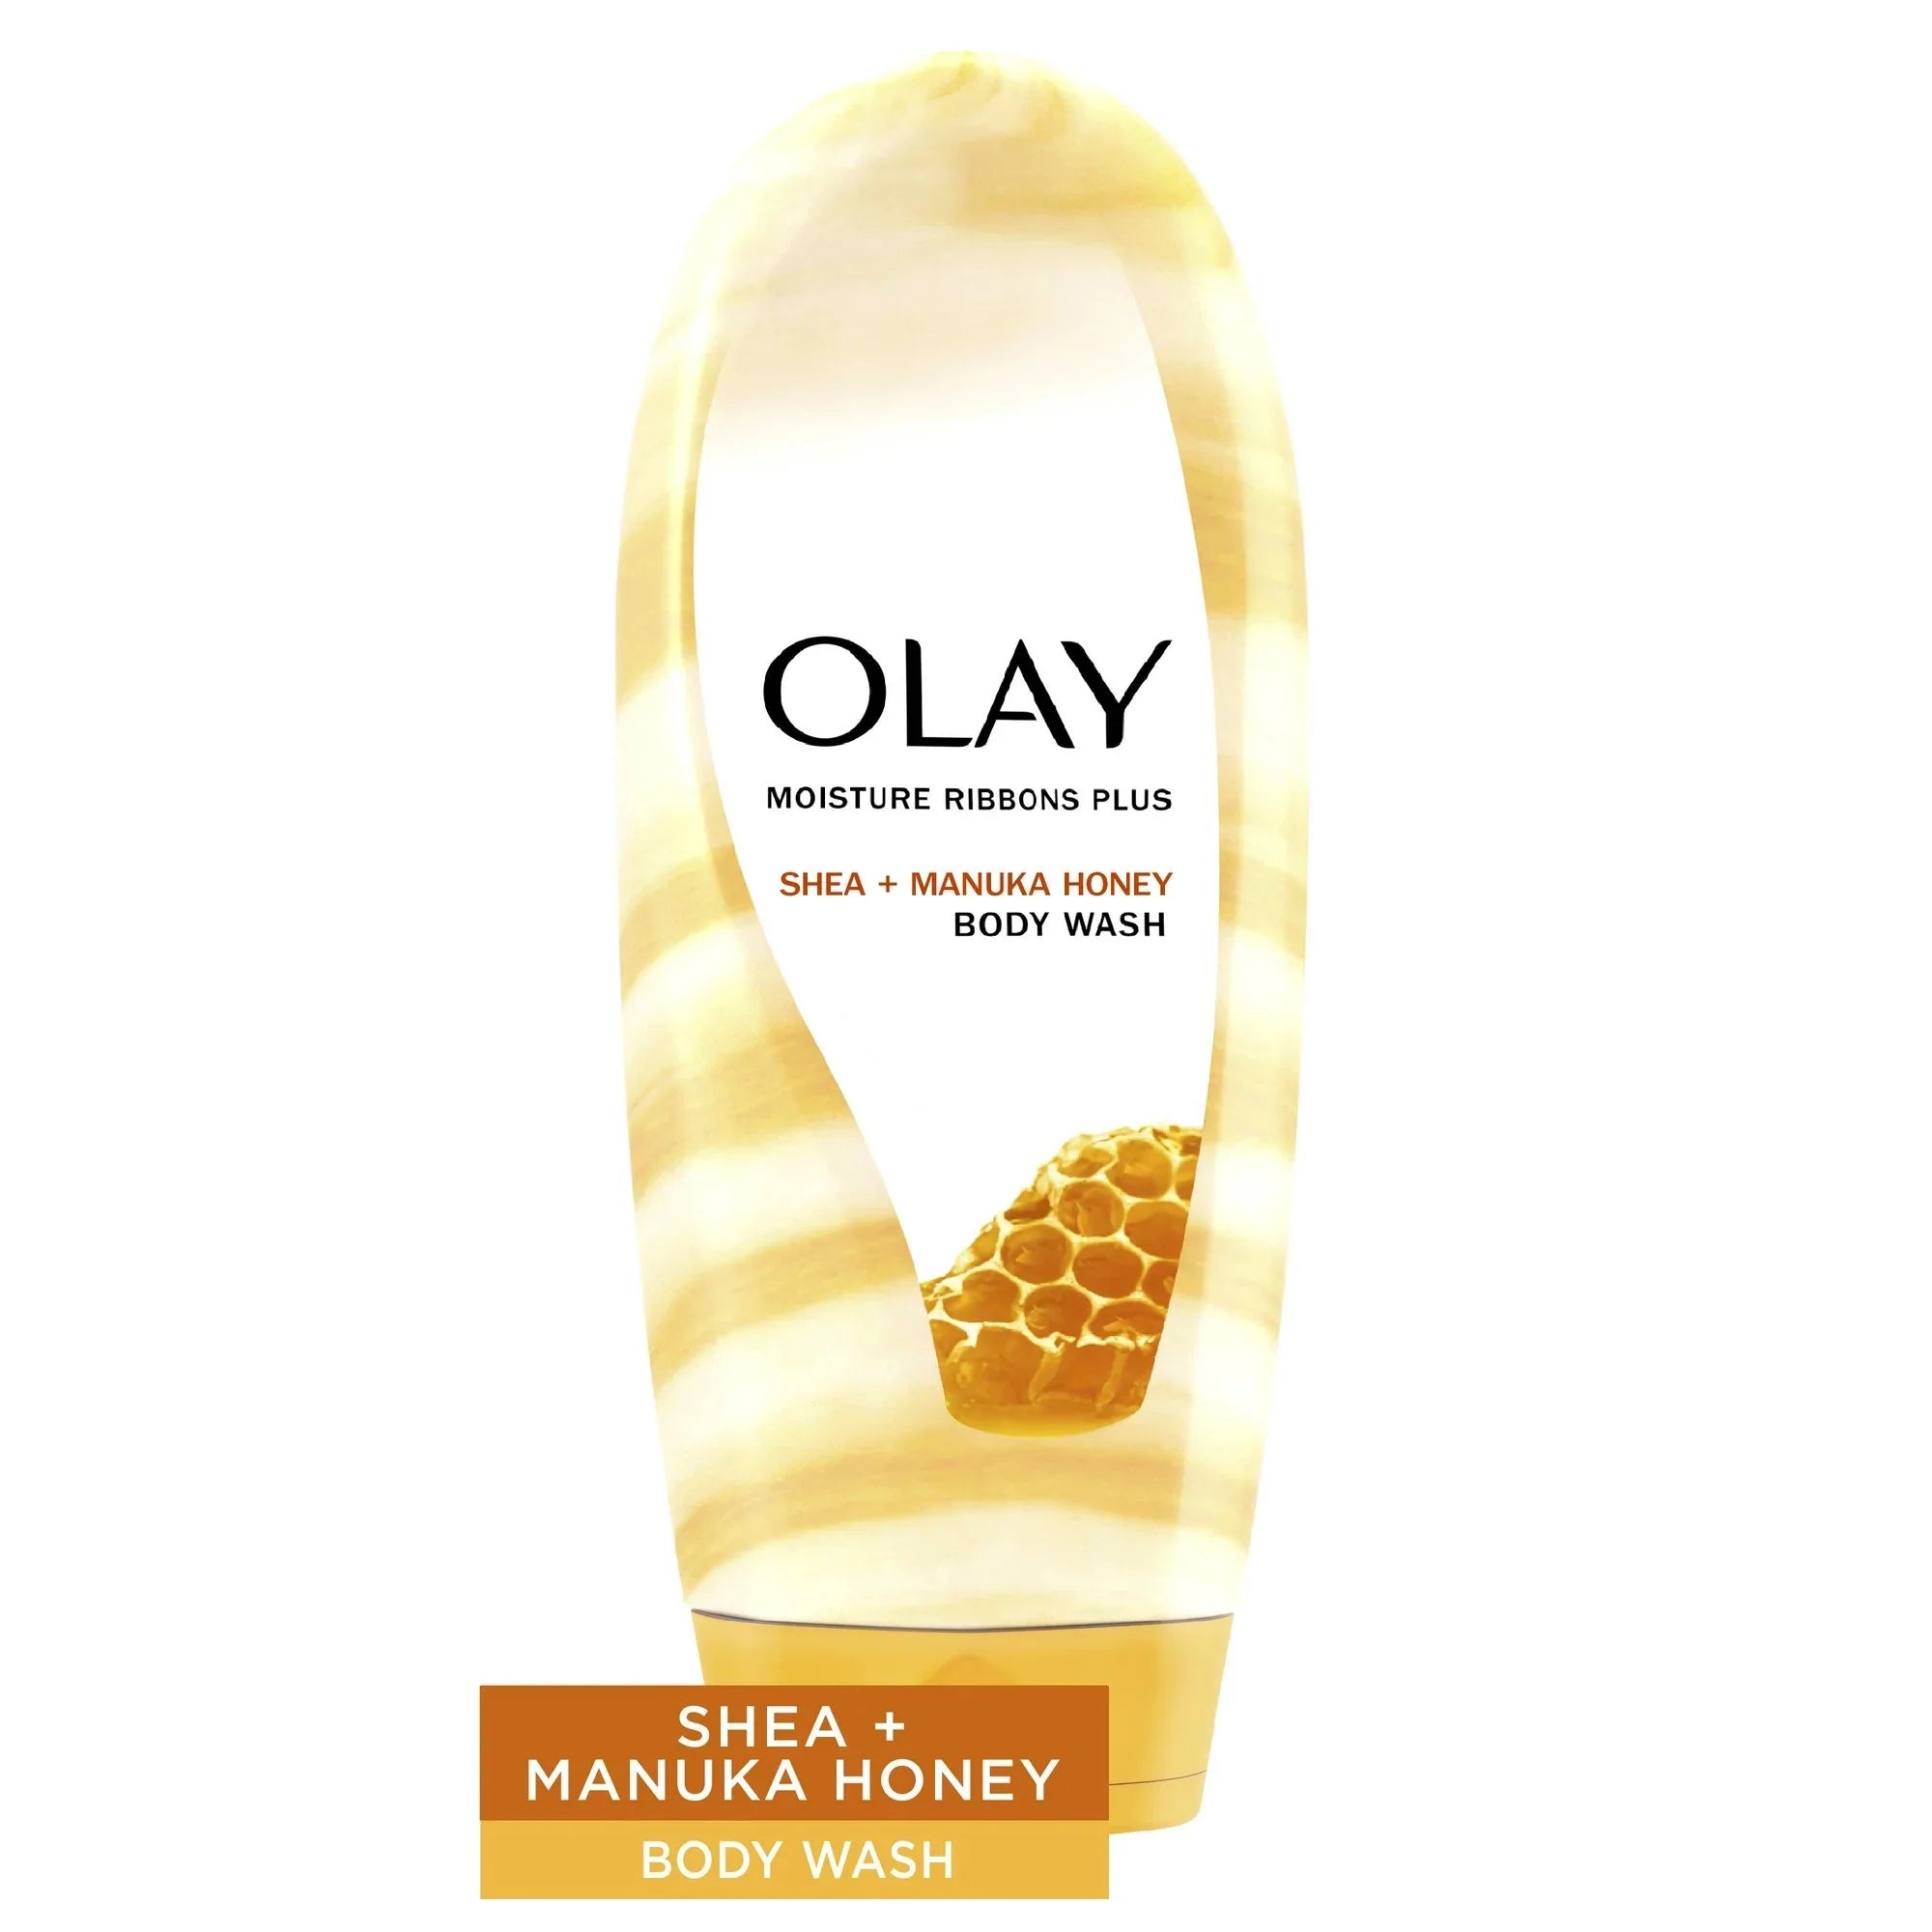 Wholesale prices with free shipping all over United States Olay Moisture Ribbons Plus Shea and Manuka Honey Body Wash, for All Skin Types, 18 fl oz - Steven Deals